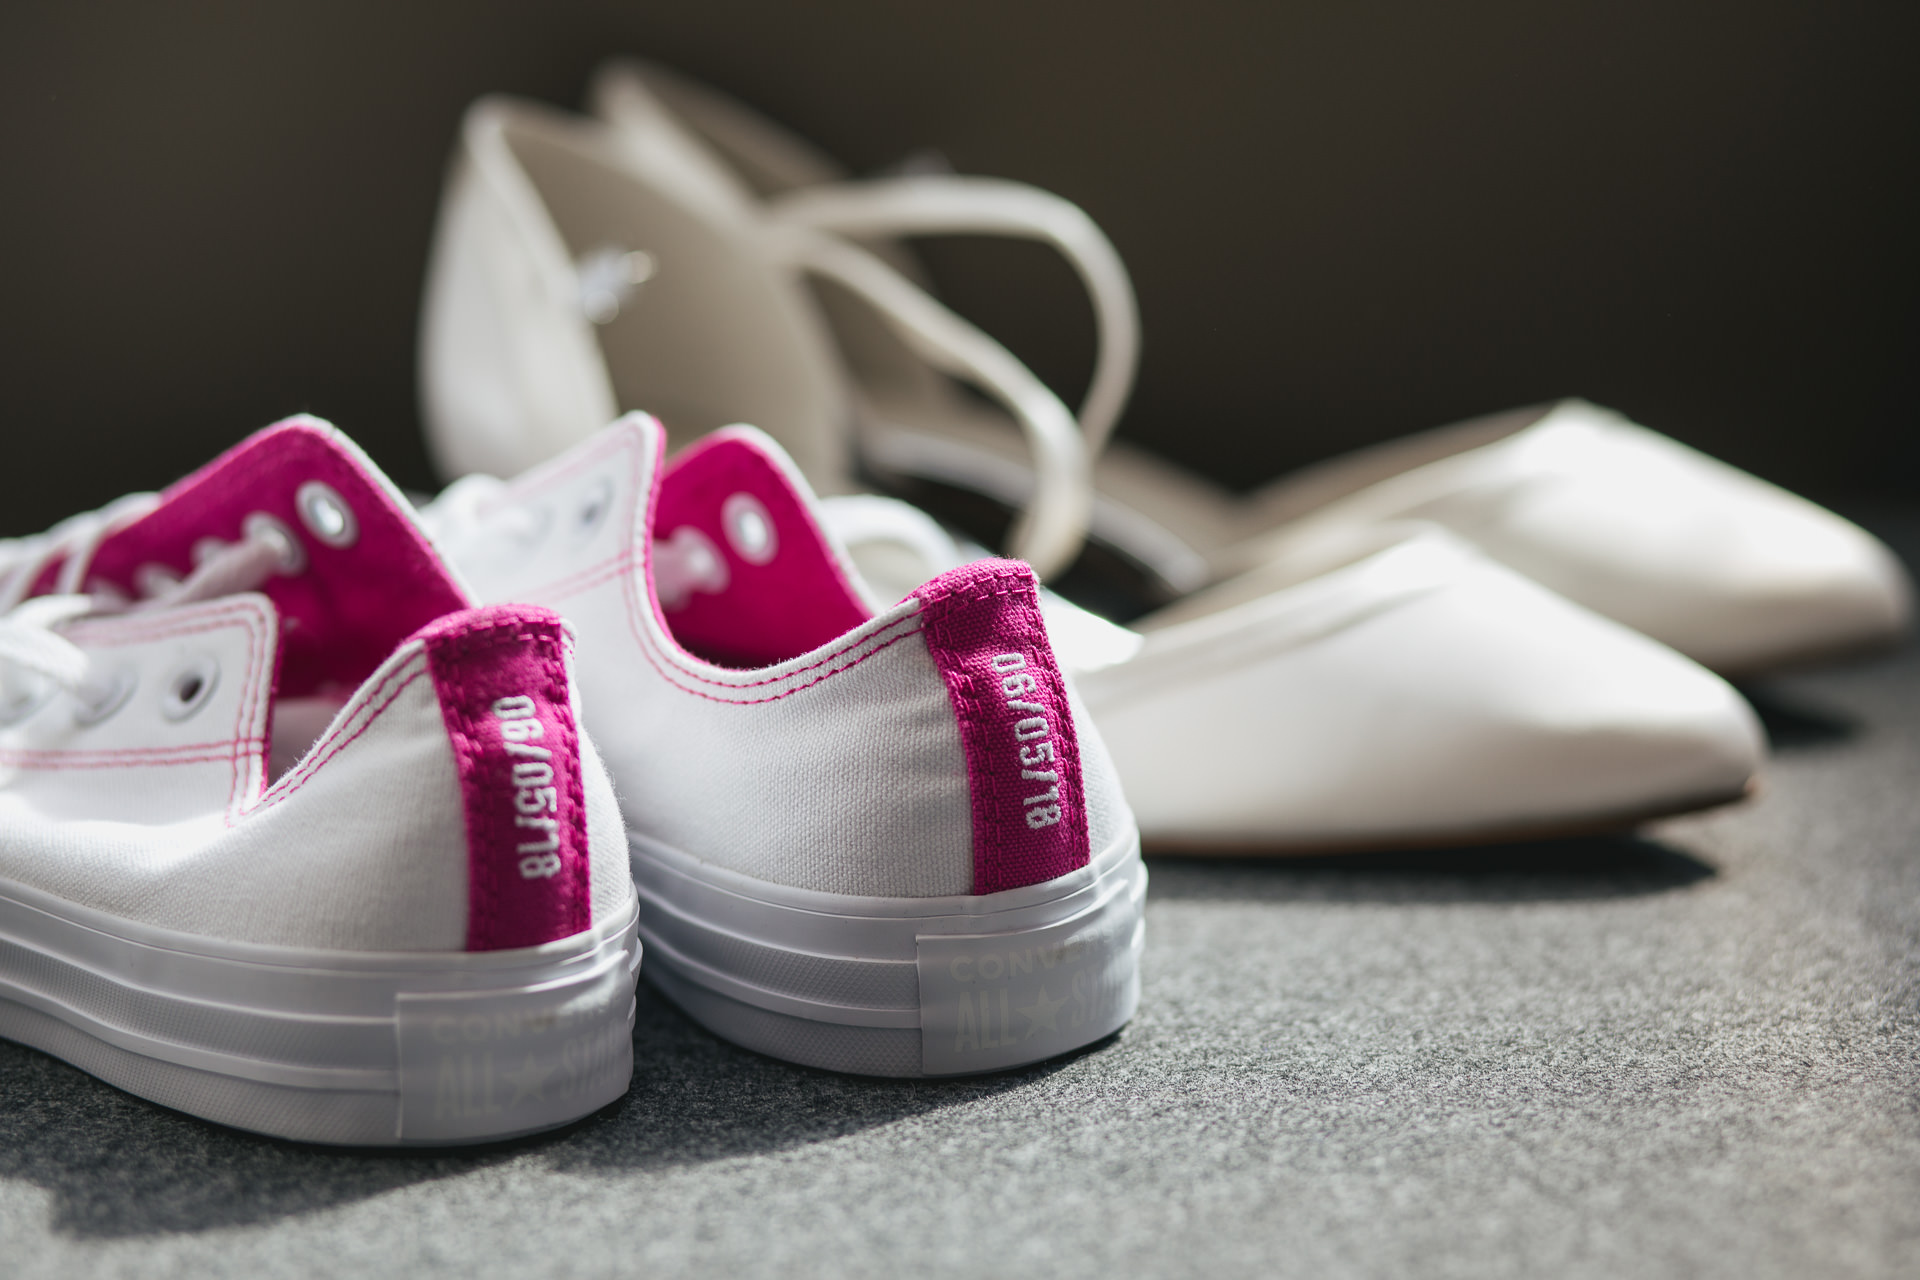 Bride's converse trainers with wedding date embroidered